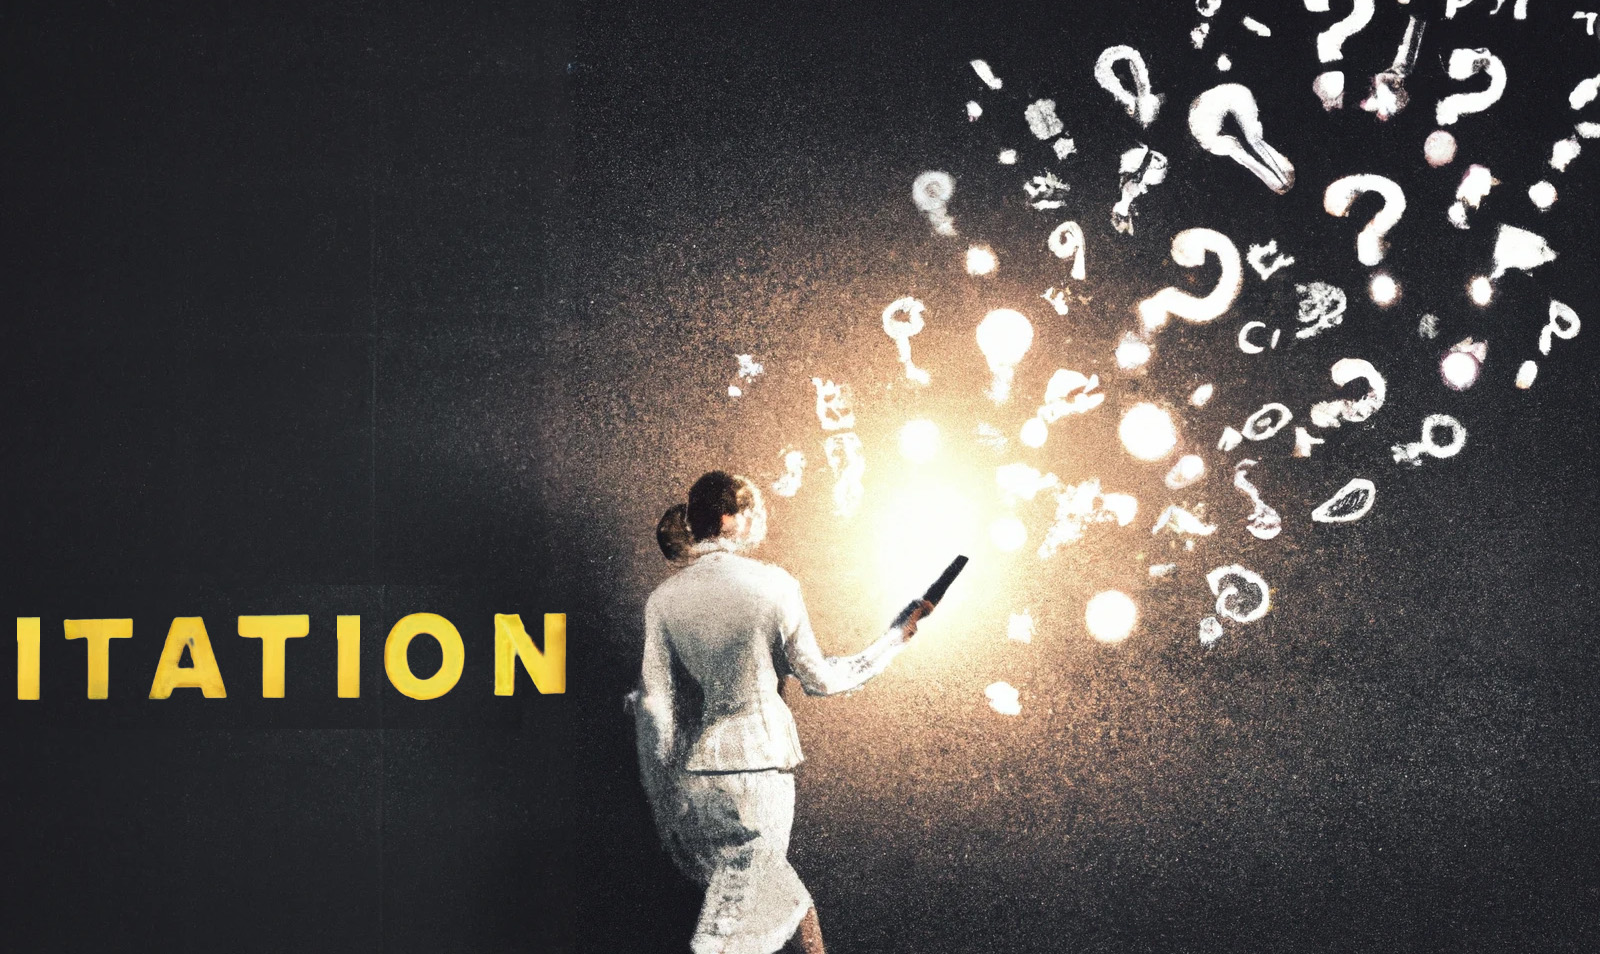 Imitation serves as a starting point for insight and innovation